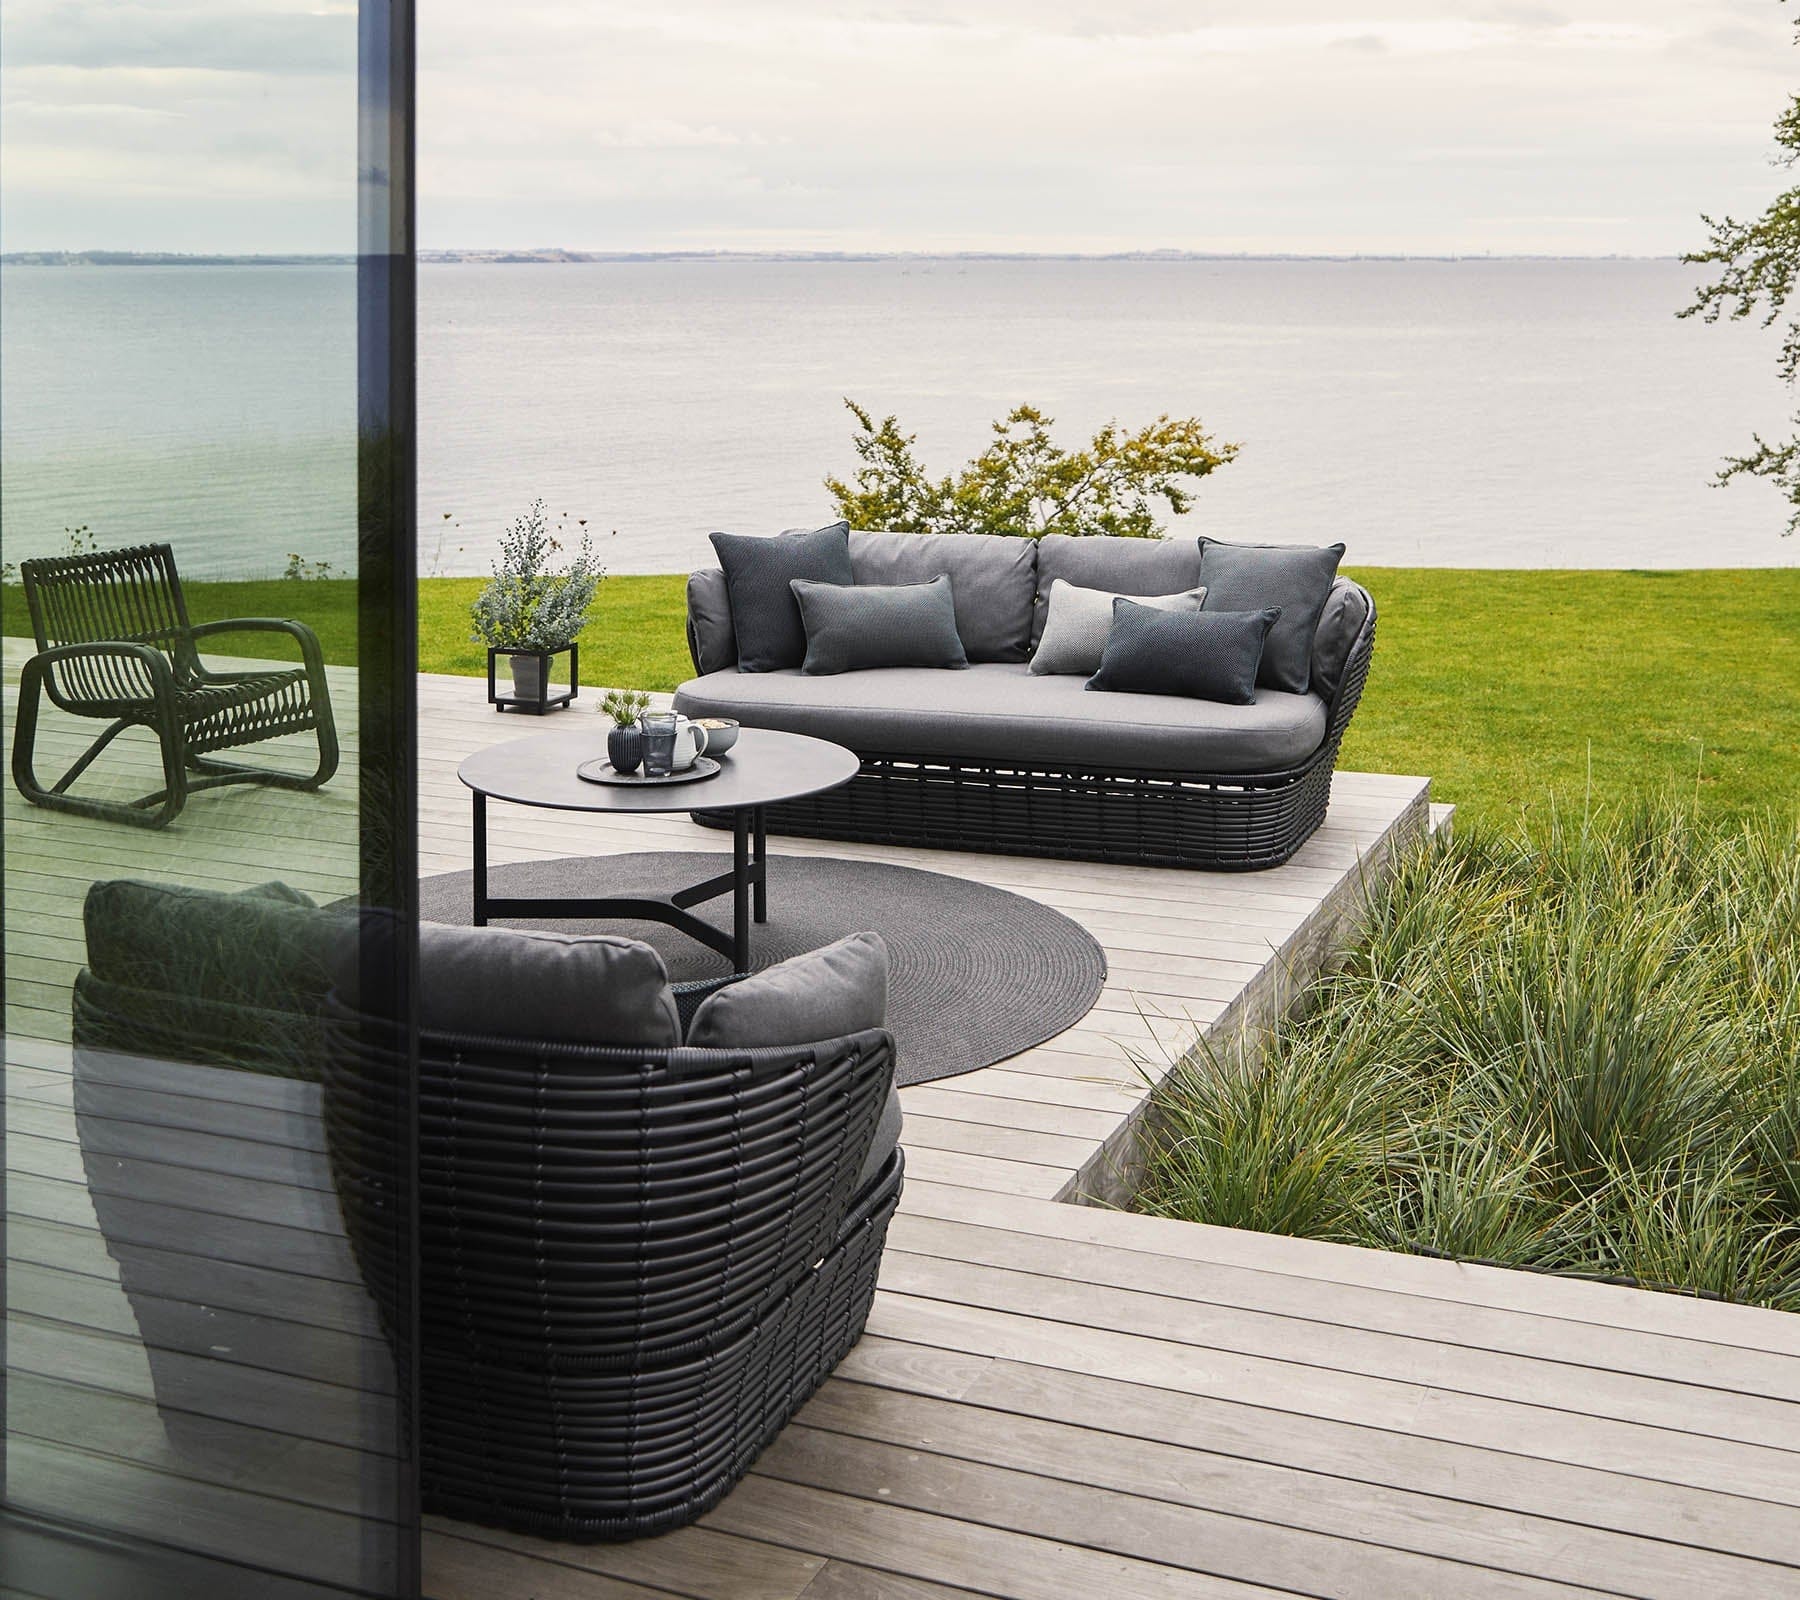 Boxhill's Basket 2-Seater Outdoor Sofa Graphite lifestyle image on wooden platform at seafront